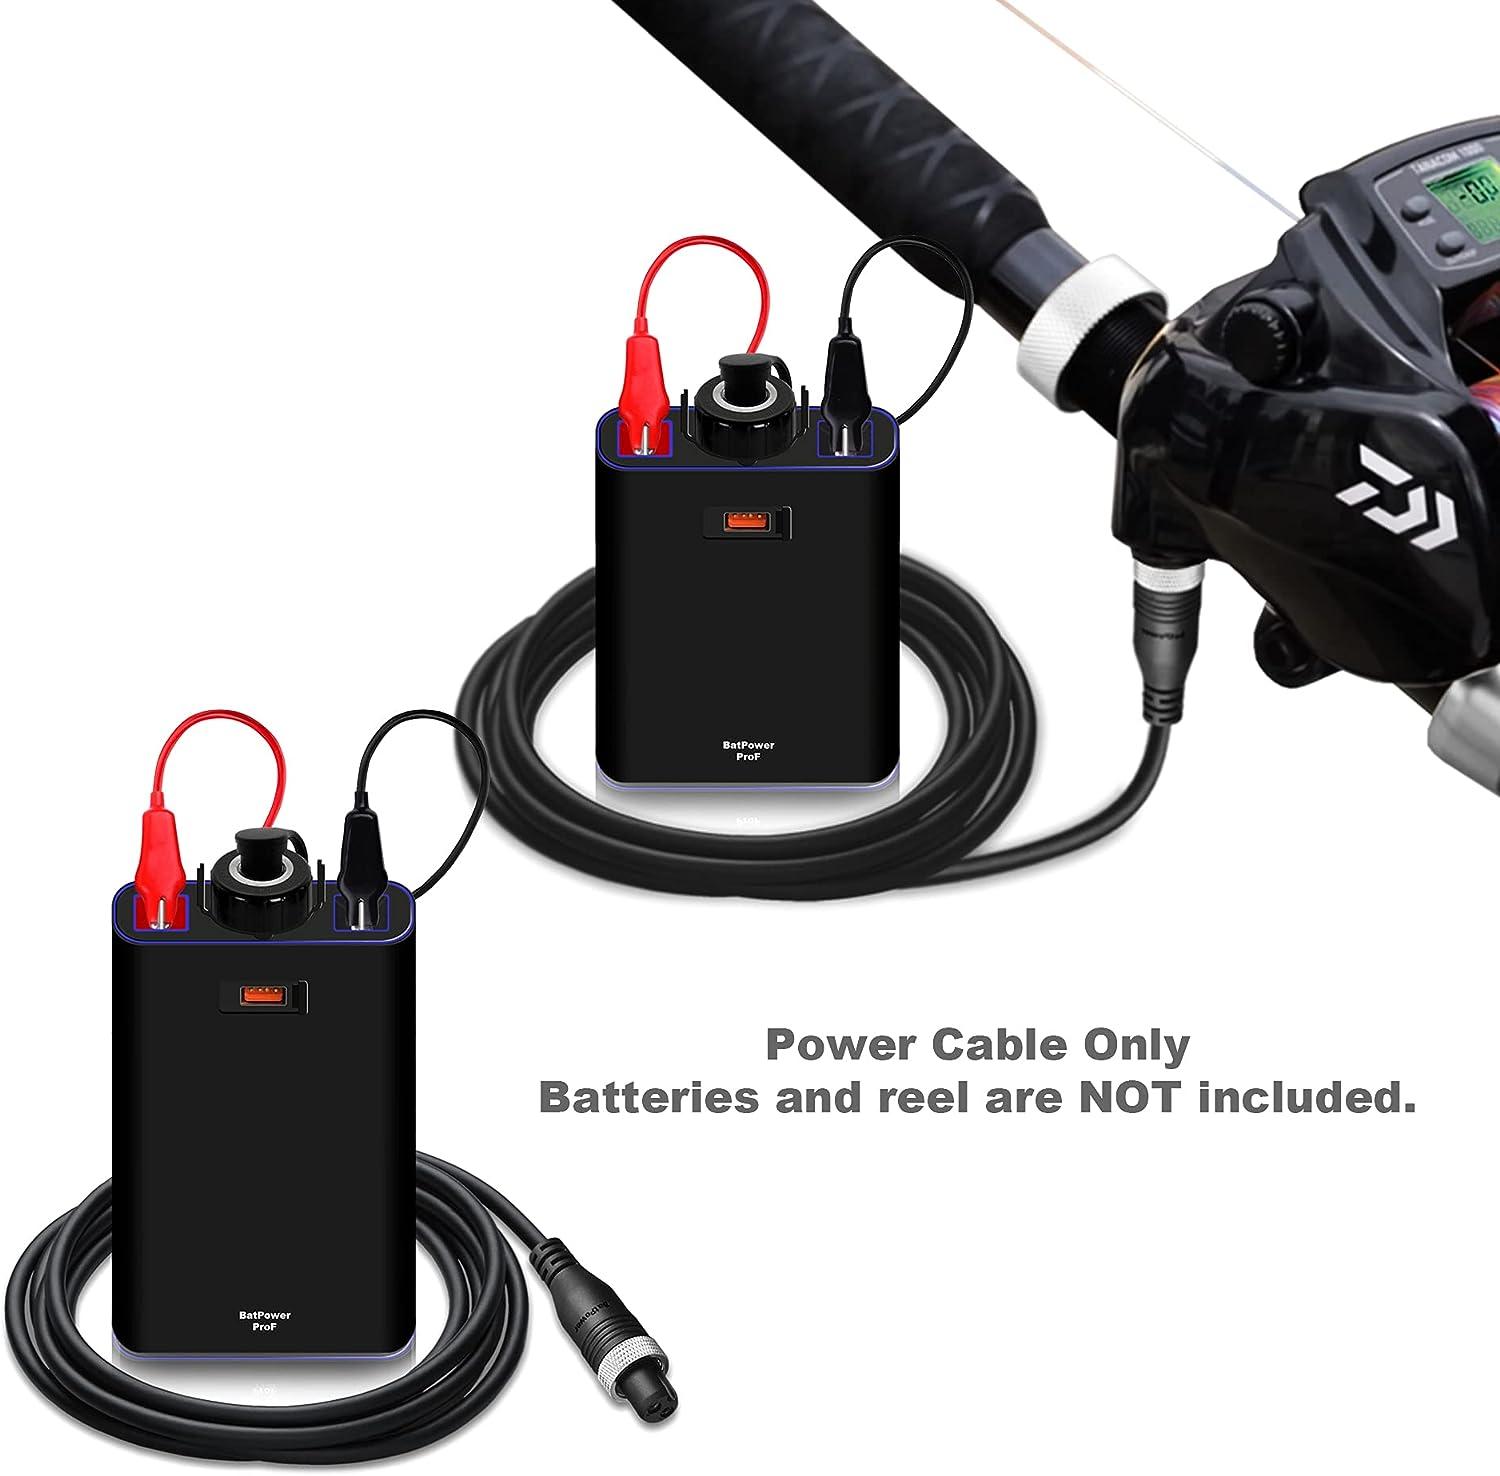 BatPower ProF for Daiwa Shimano Electric Fishing Reel Battery Car Charger  Vehicle Auto Power Adapter 